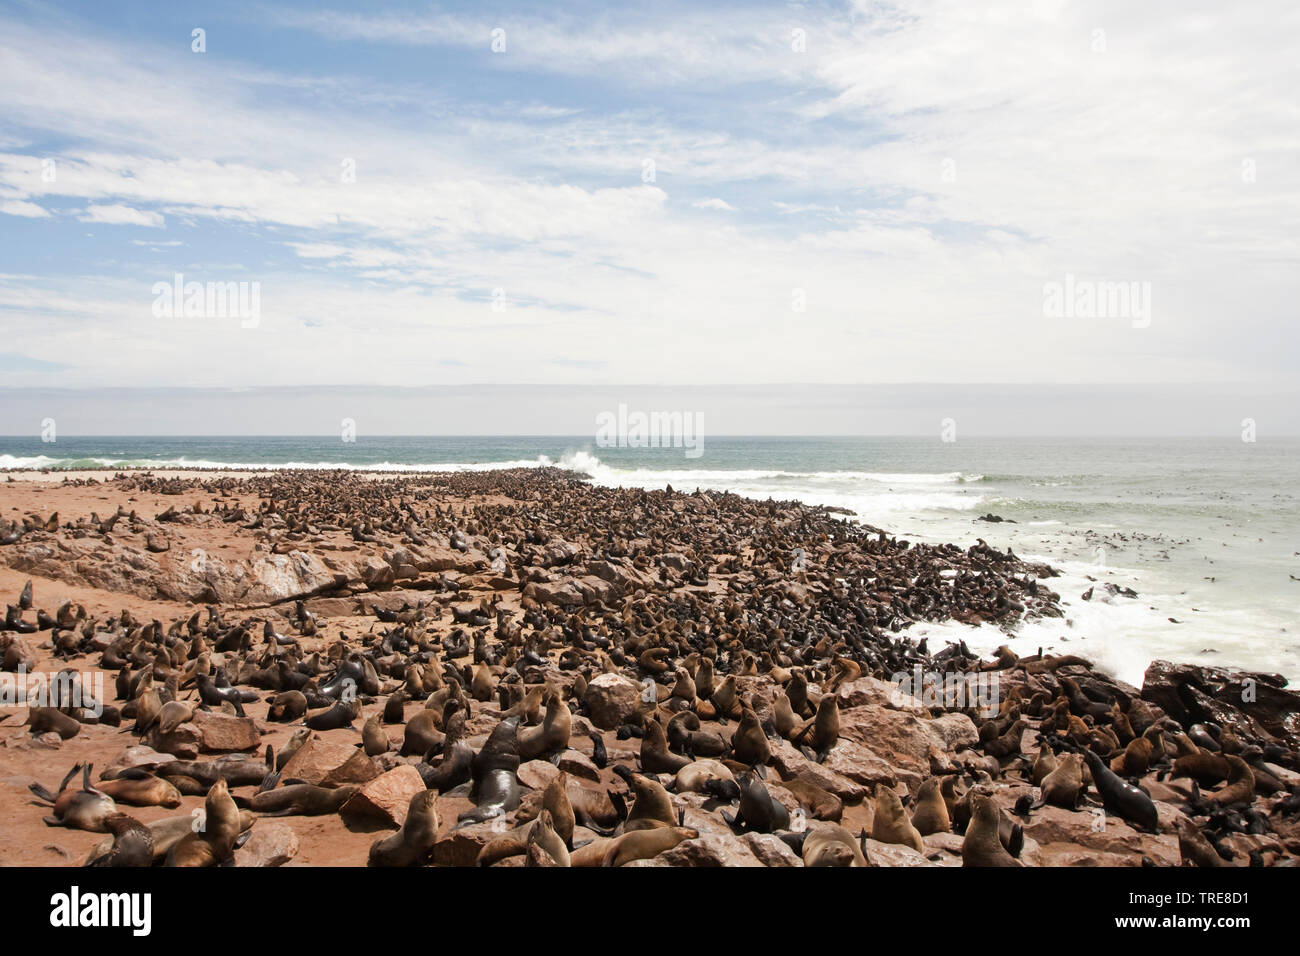 South African fur seal, Cape fur seal (Arctocephalus pusillus pusillus, Arctocephalus pusillus), colony of seals at Cape Cross, Namibia Stock Photo